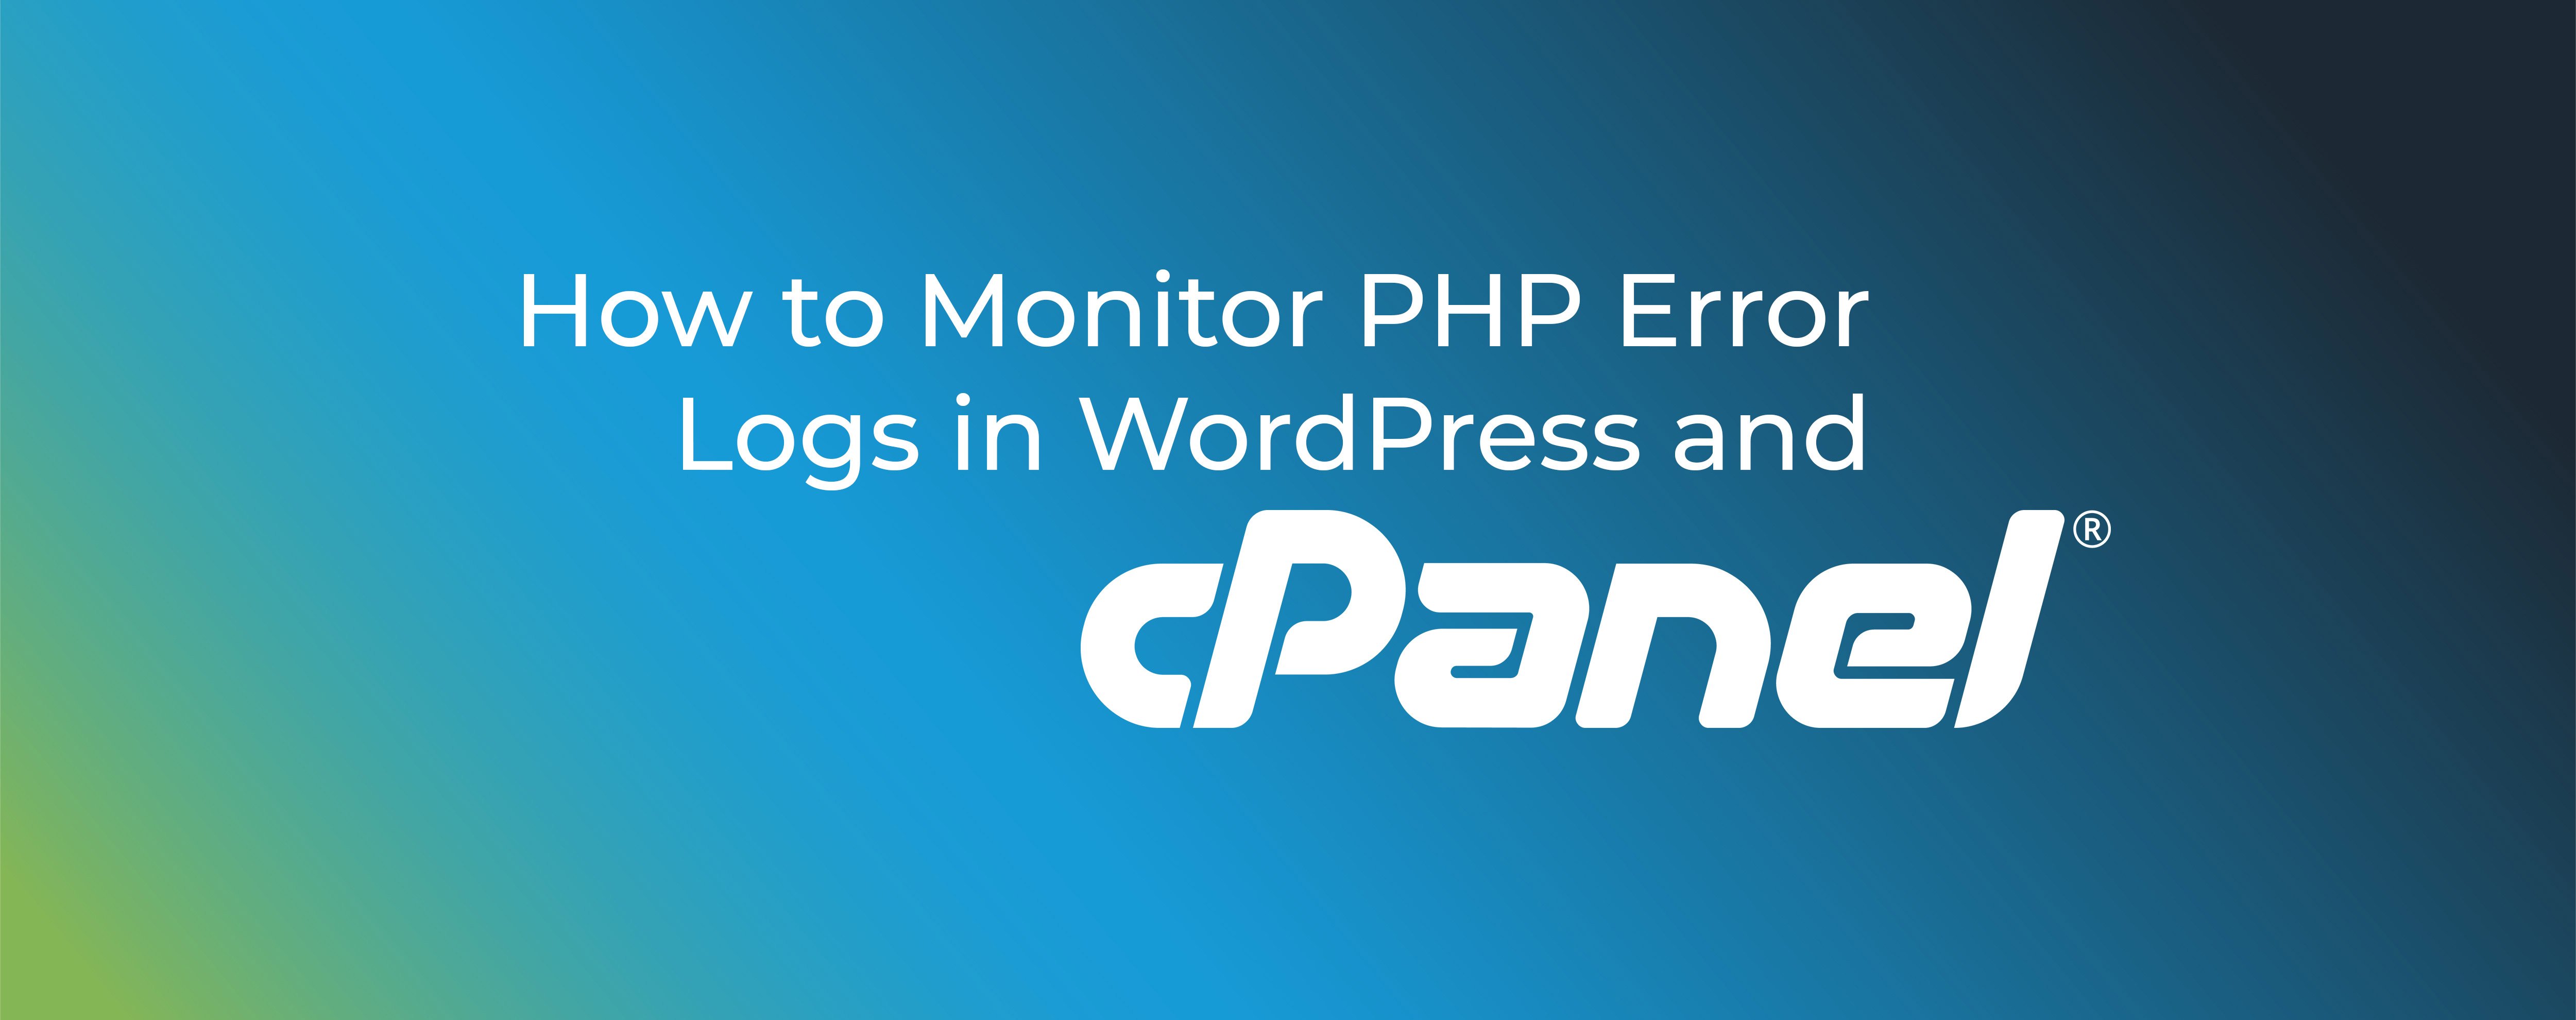 How to Monitor PHP Error Logs in WordPress and cPanel